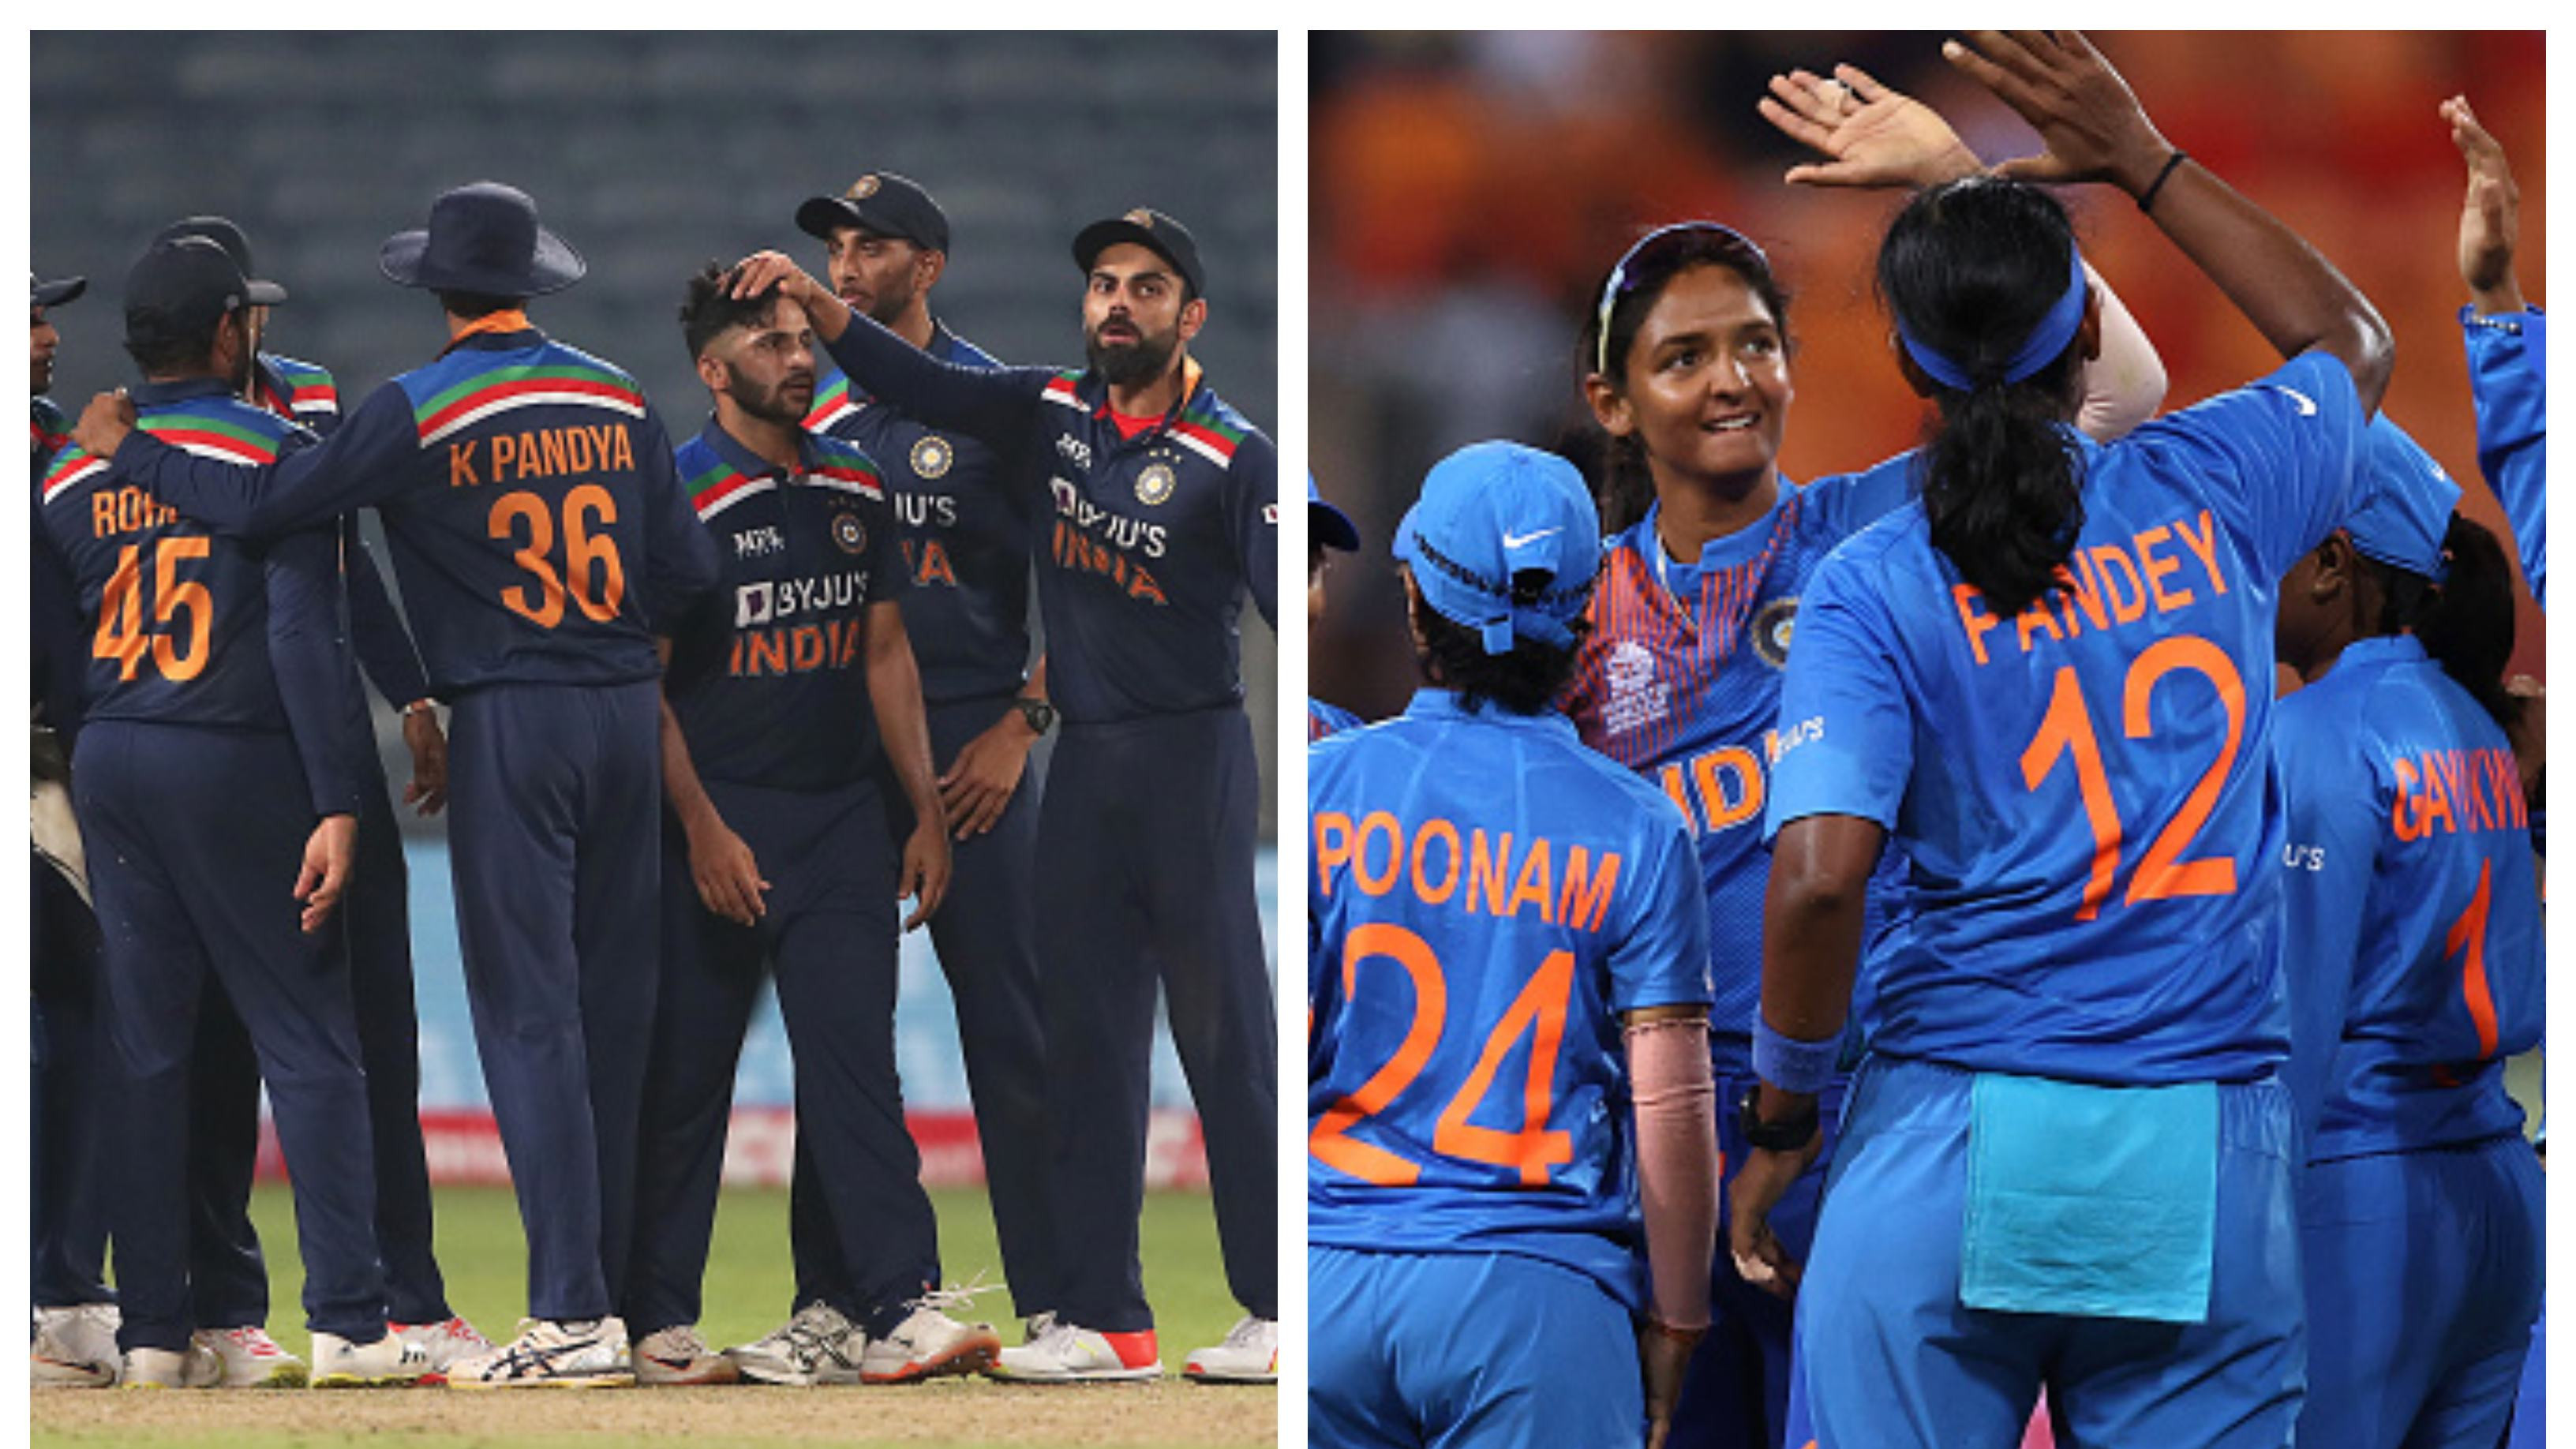 BCCI to send men’s, women’s team for 2028 Los Angeles Olympics if cricket included in roster: Report